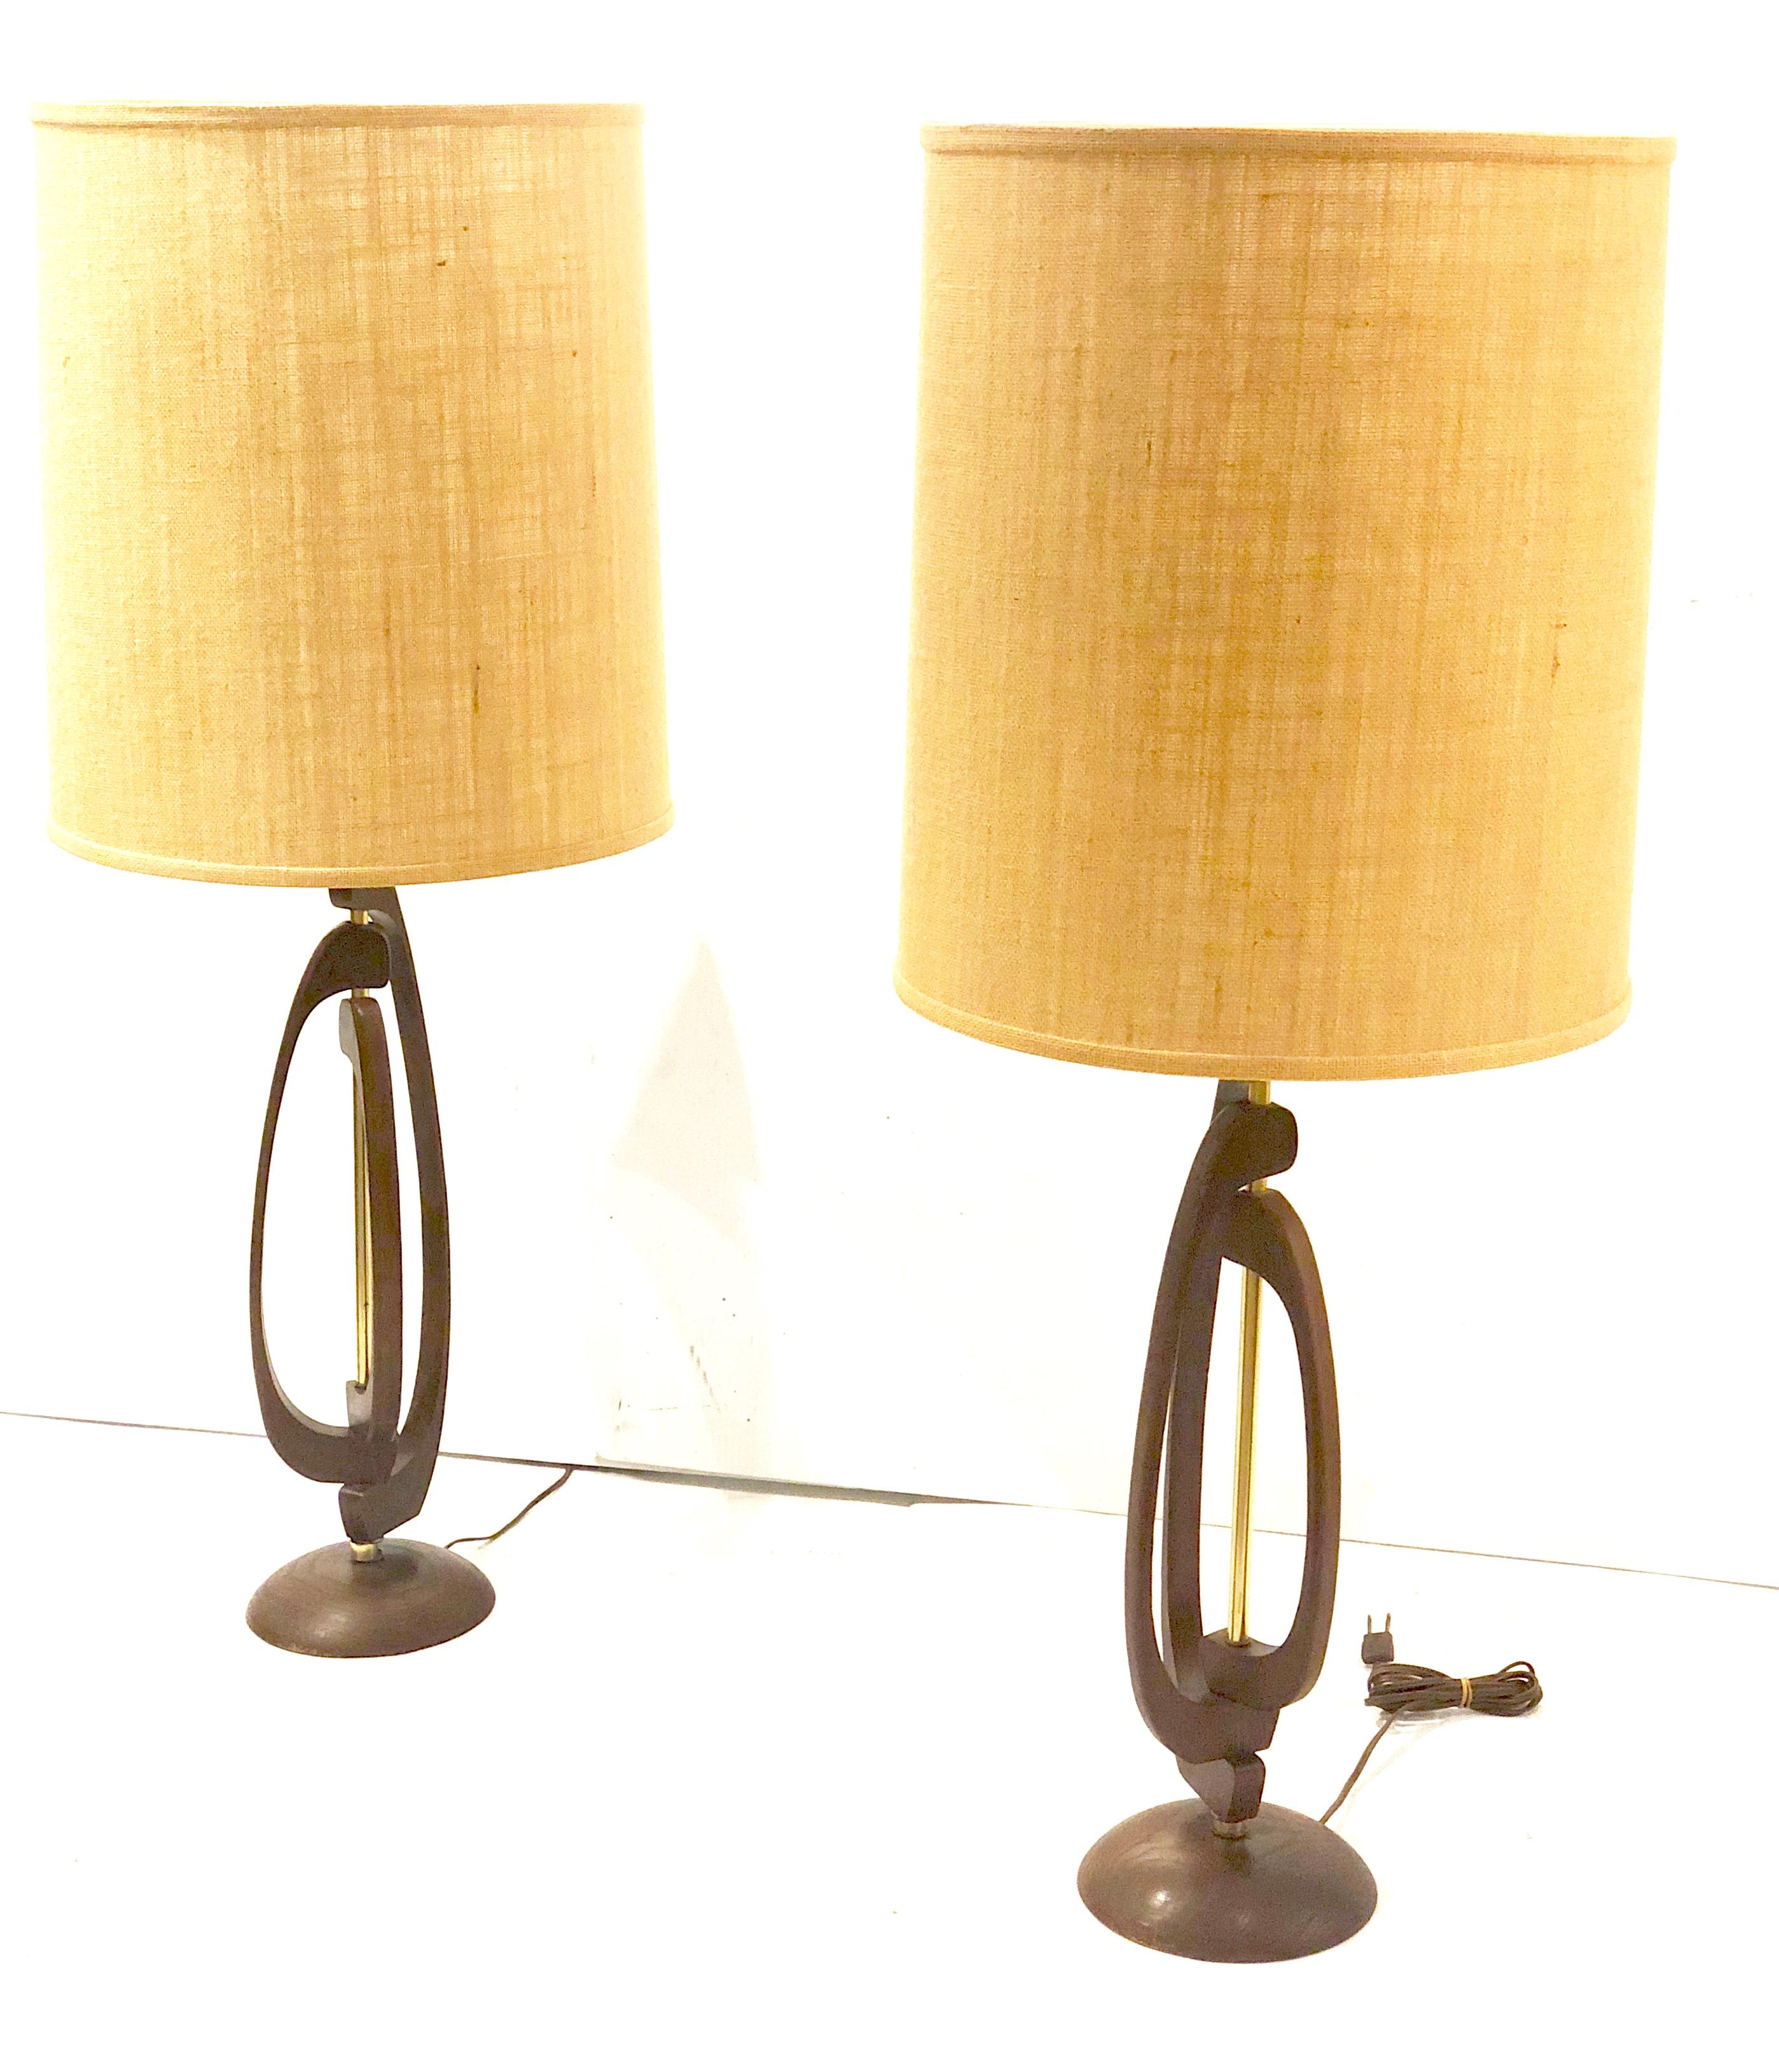 Nice original pair of 1950s American Mid-Century Modern Atomic Age table lamps, by Modeline The lampshades are the original but we have remake them, they are in very nice condition the bases have the original finish in walnut we oil them and cleaned